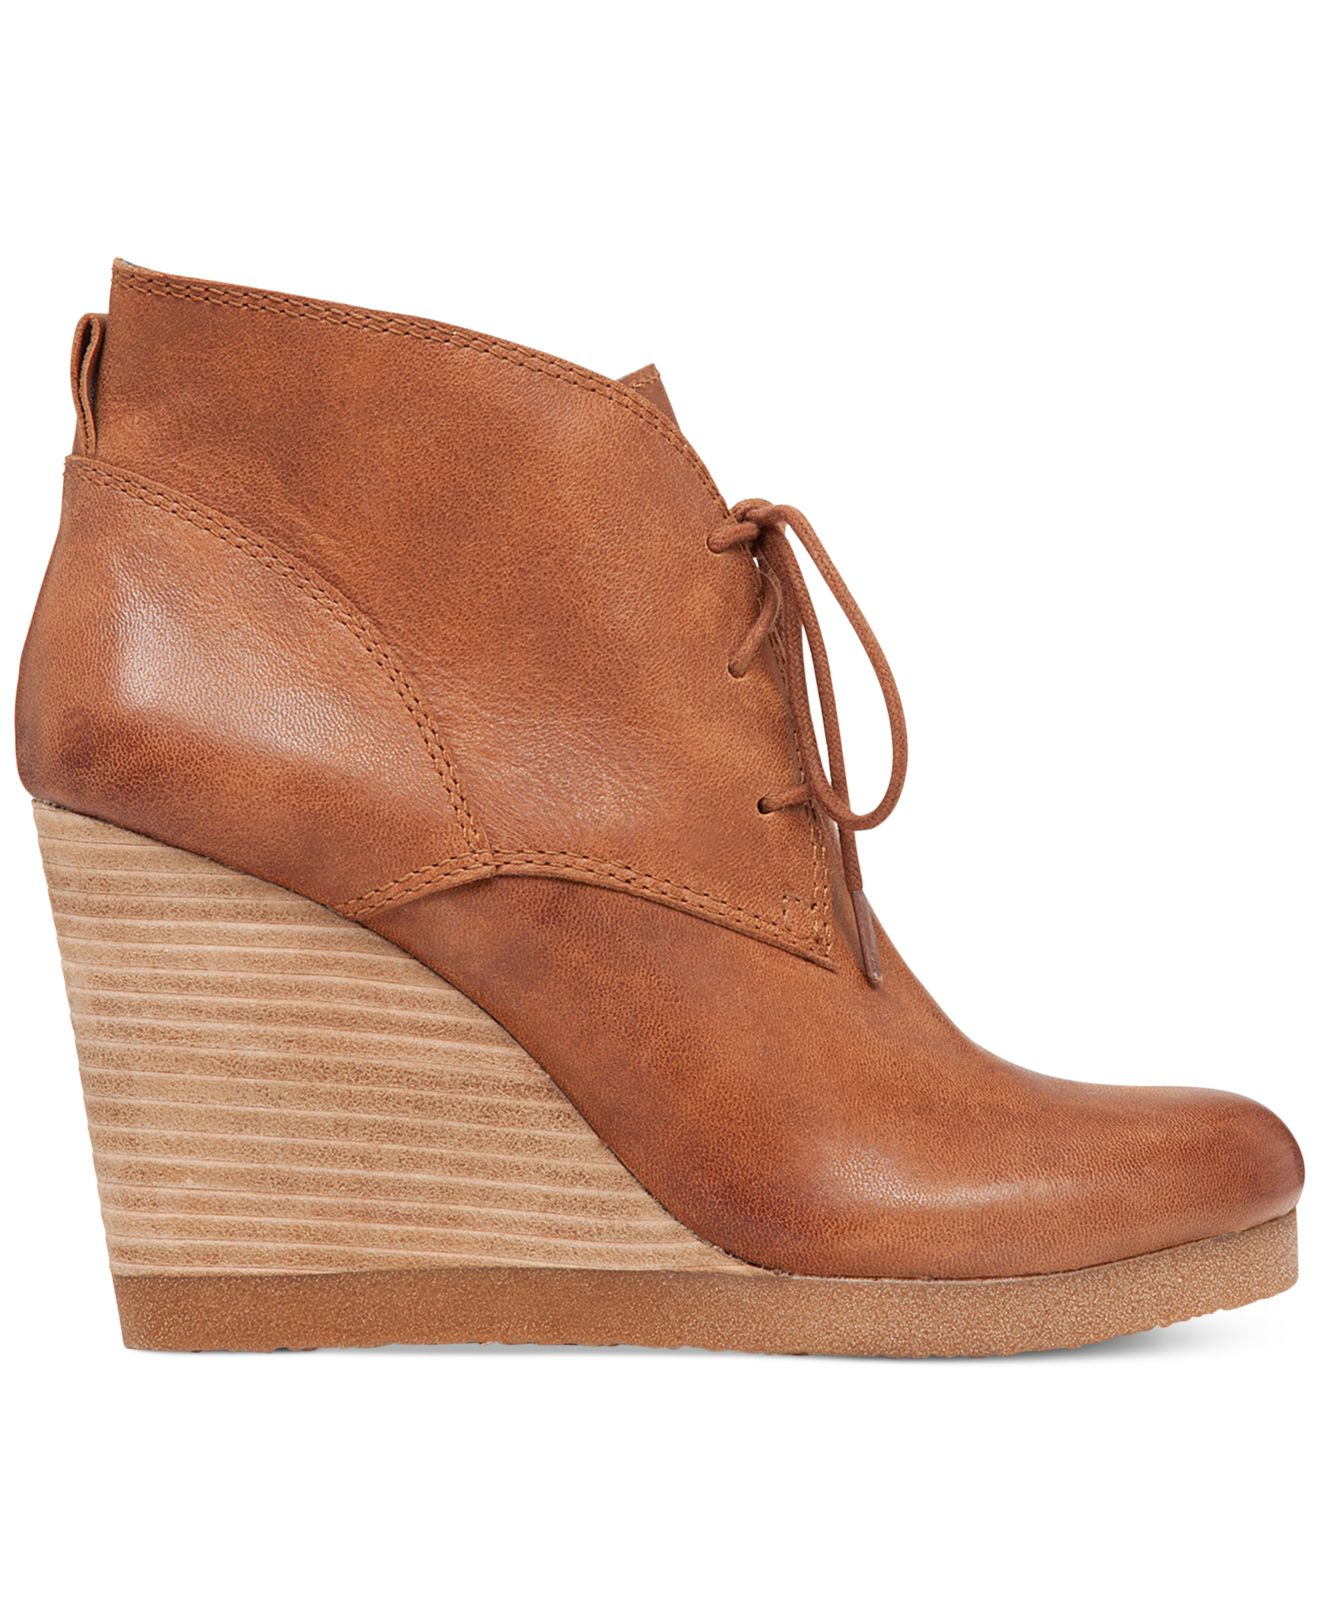 Lyst - Lucky Brand Women's Taheeti Lace-up Wedge Booties in Brown